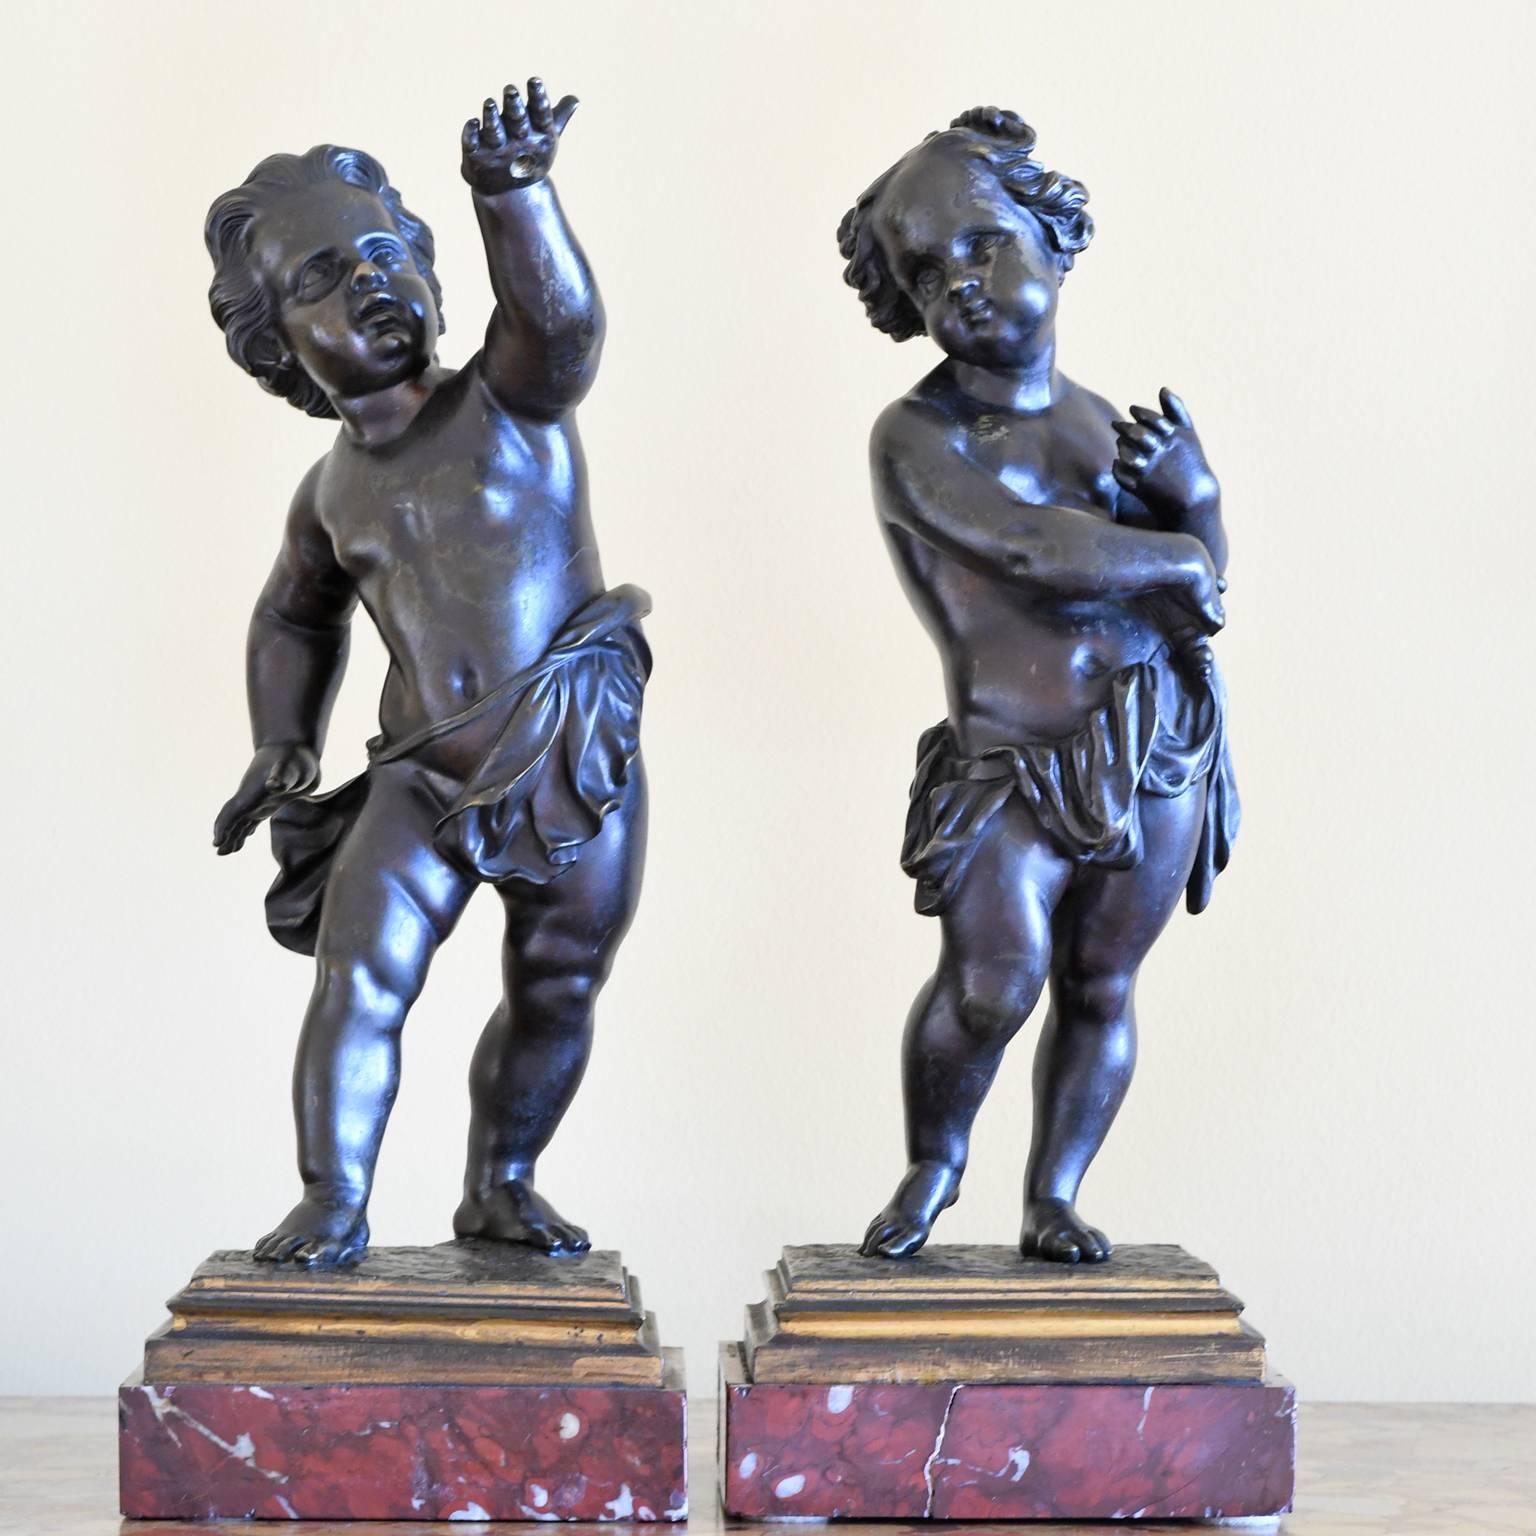 A pair of cast bronze cherubs or putti standing contrapposto on a square red marble base, France, circa late 1800s.
Note: These charming cherubic figures were probably used in combination with candelabras based on the markings on the backs of each